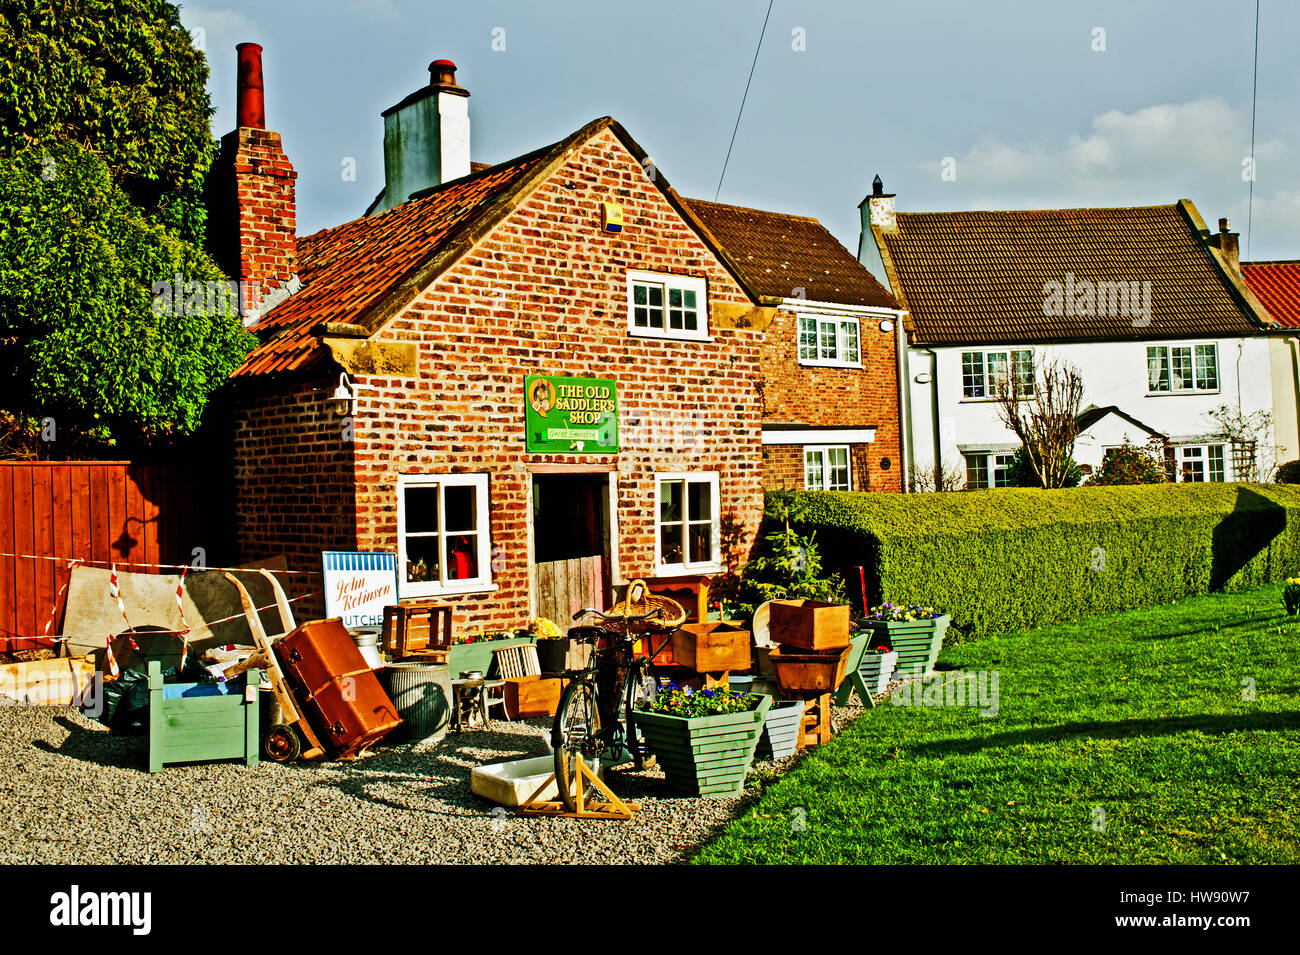 The Old Sadlers Shop, Great Smeaton, Yorkshire Stock Photo